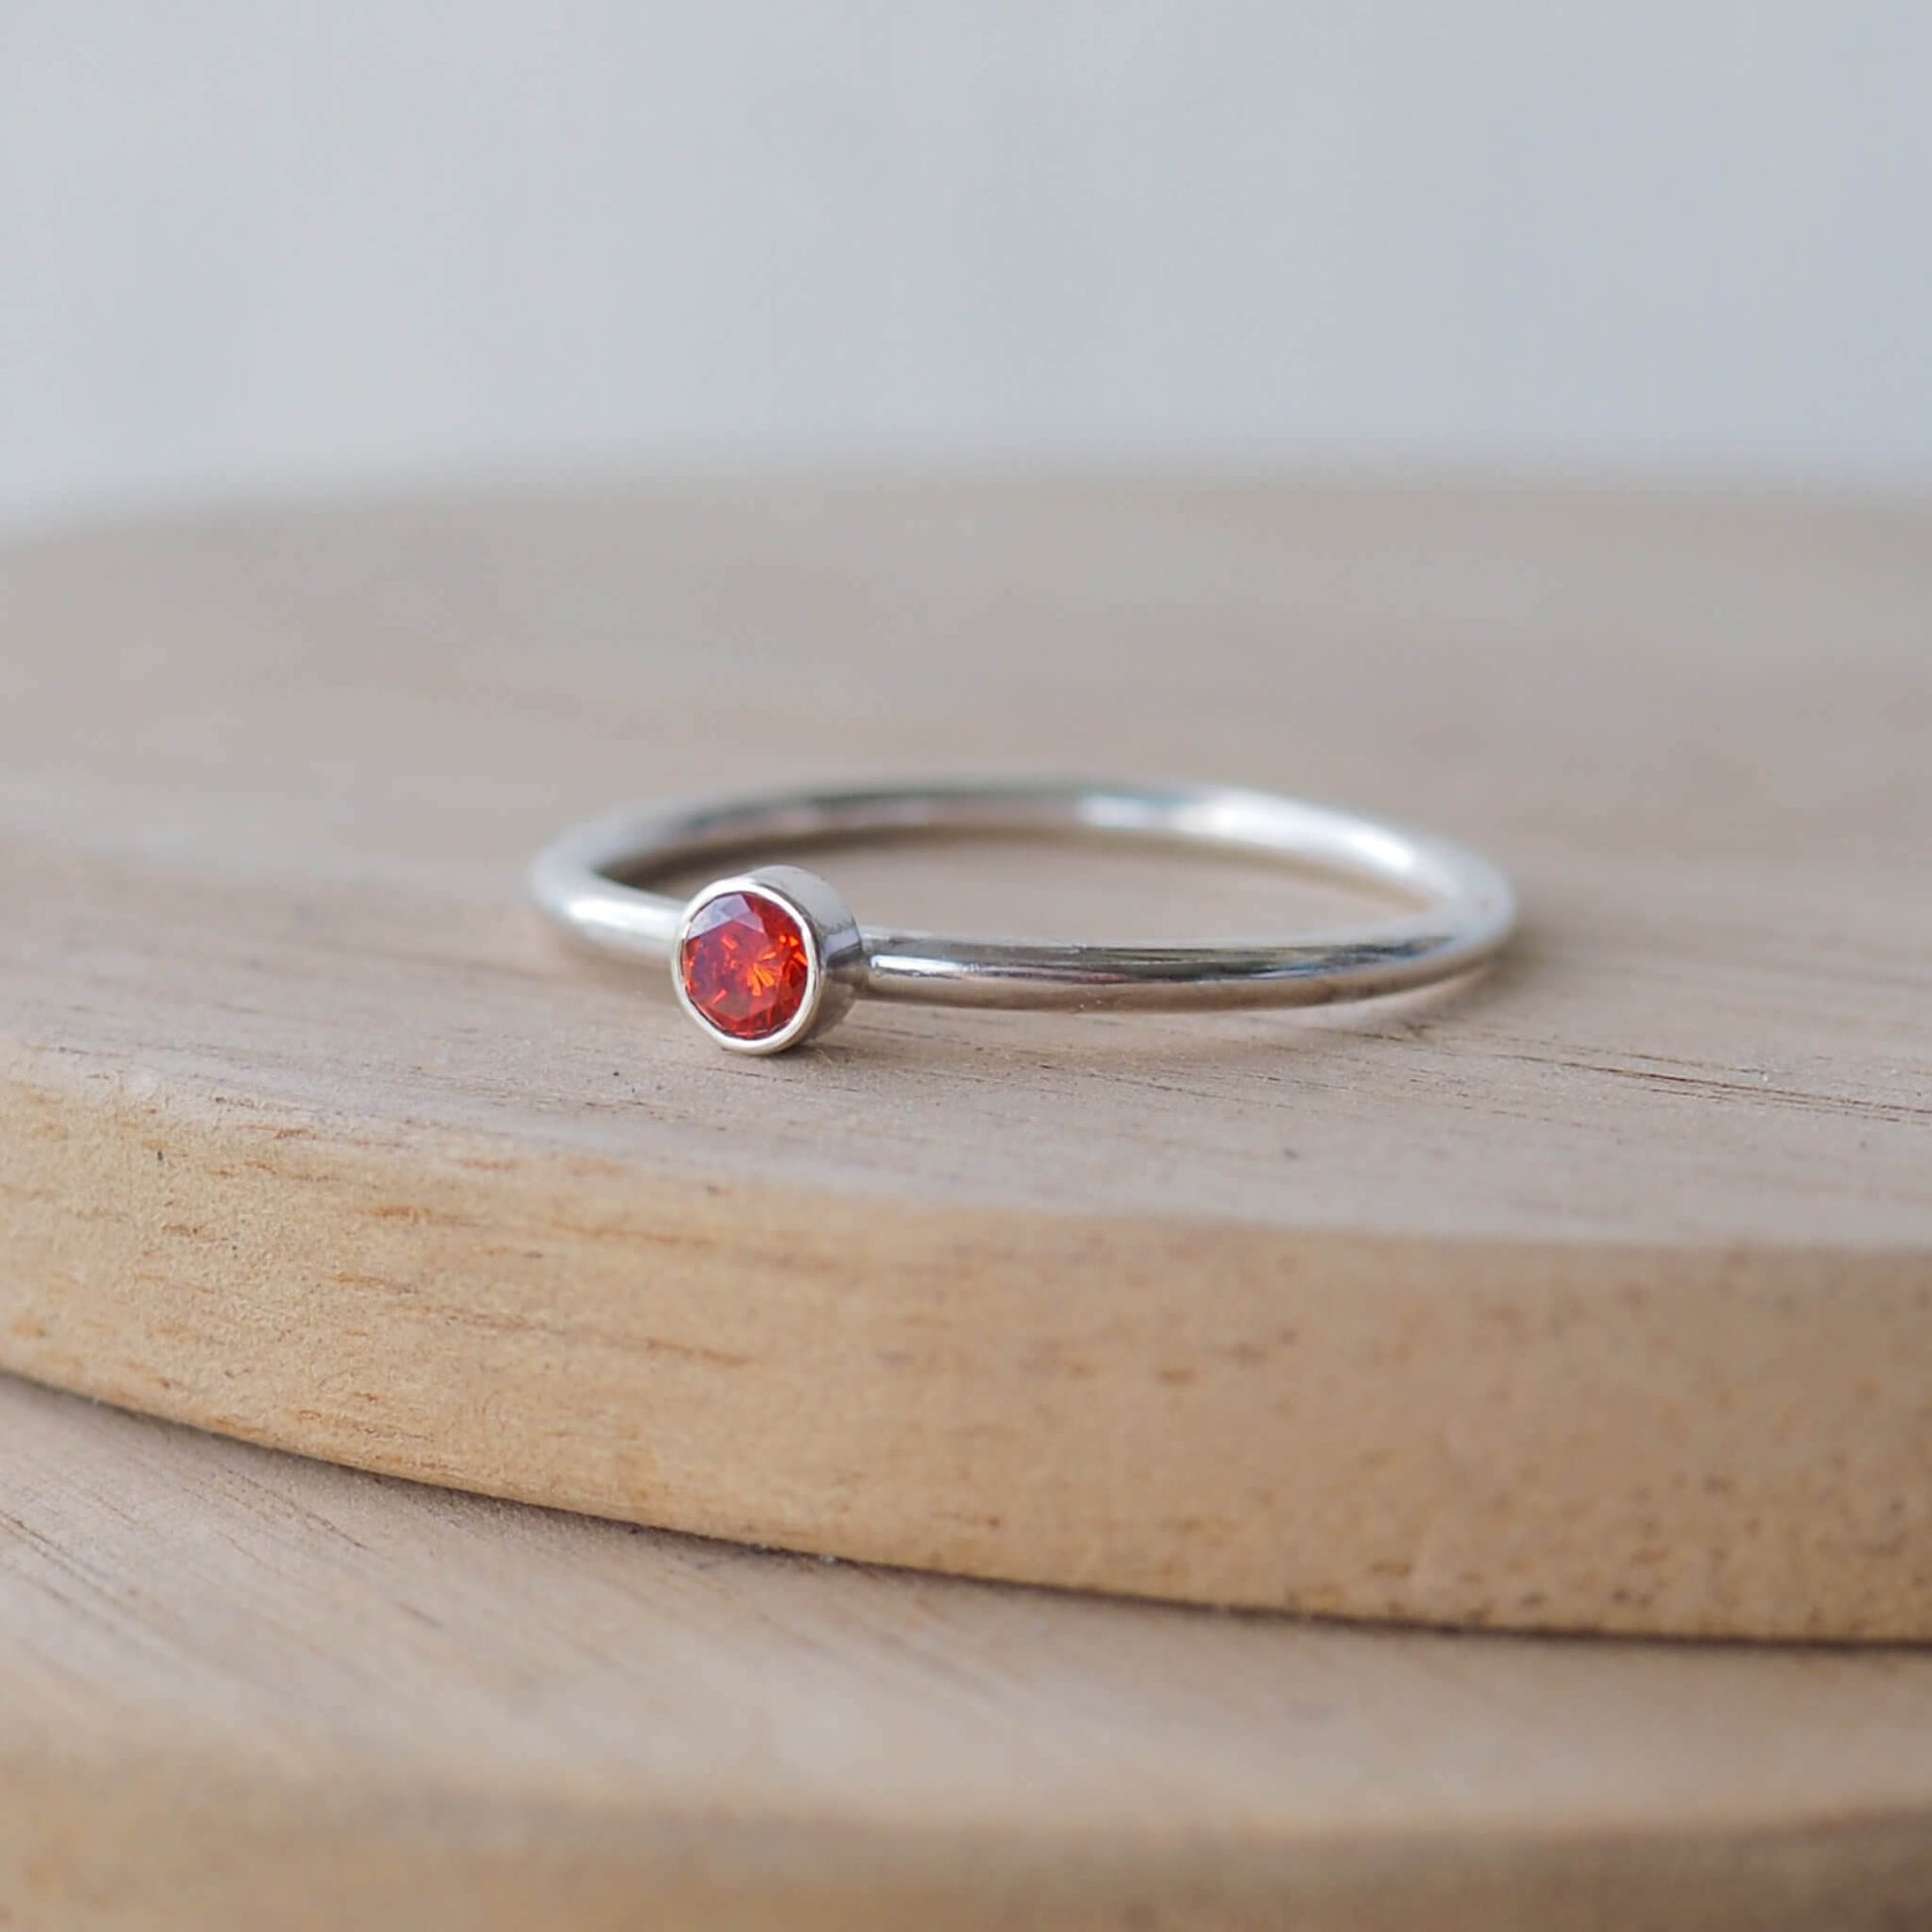 Silver ring with a red gemstone. The ring is simple in style with no embellishment , with a round wire band 1.5mm thick with a simple red 3mm round cubic zirconia garnet colour stone set in an enclosed silver setting. Garnet is birthstone for January. The ring is Sterling Silver and made to your ring size. Handmade in Scotland by Maram Jewellery